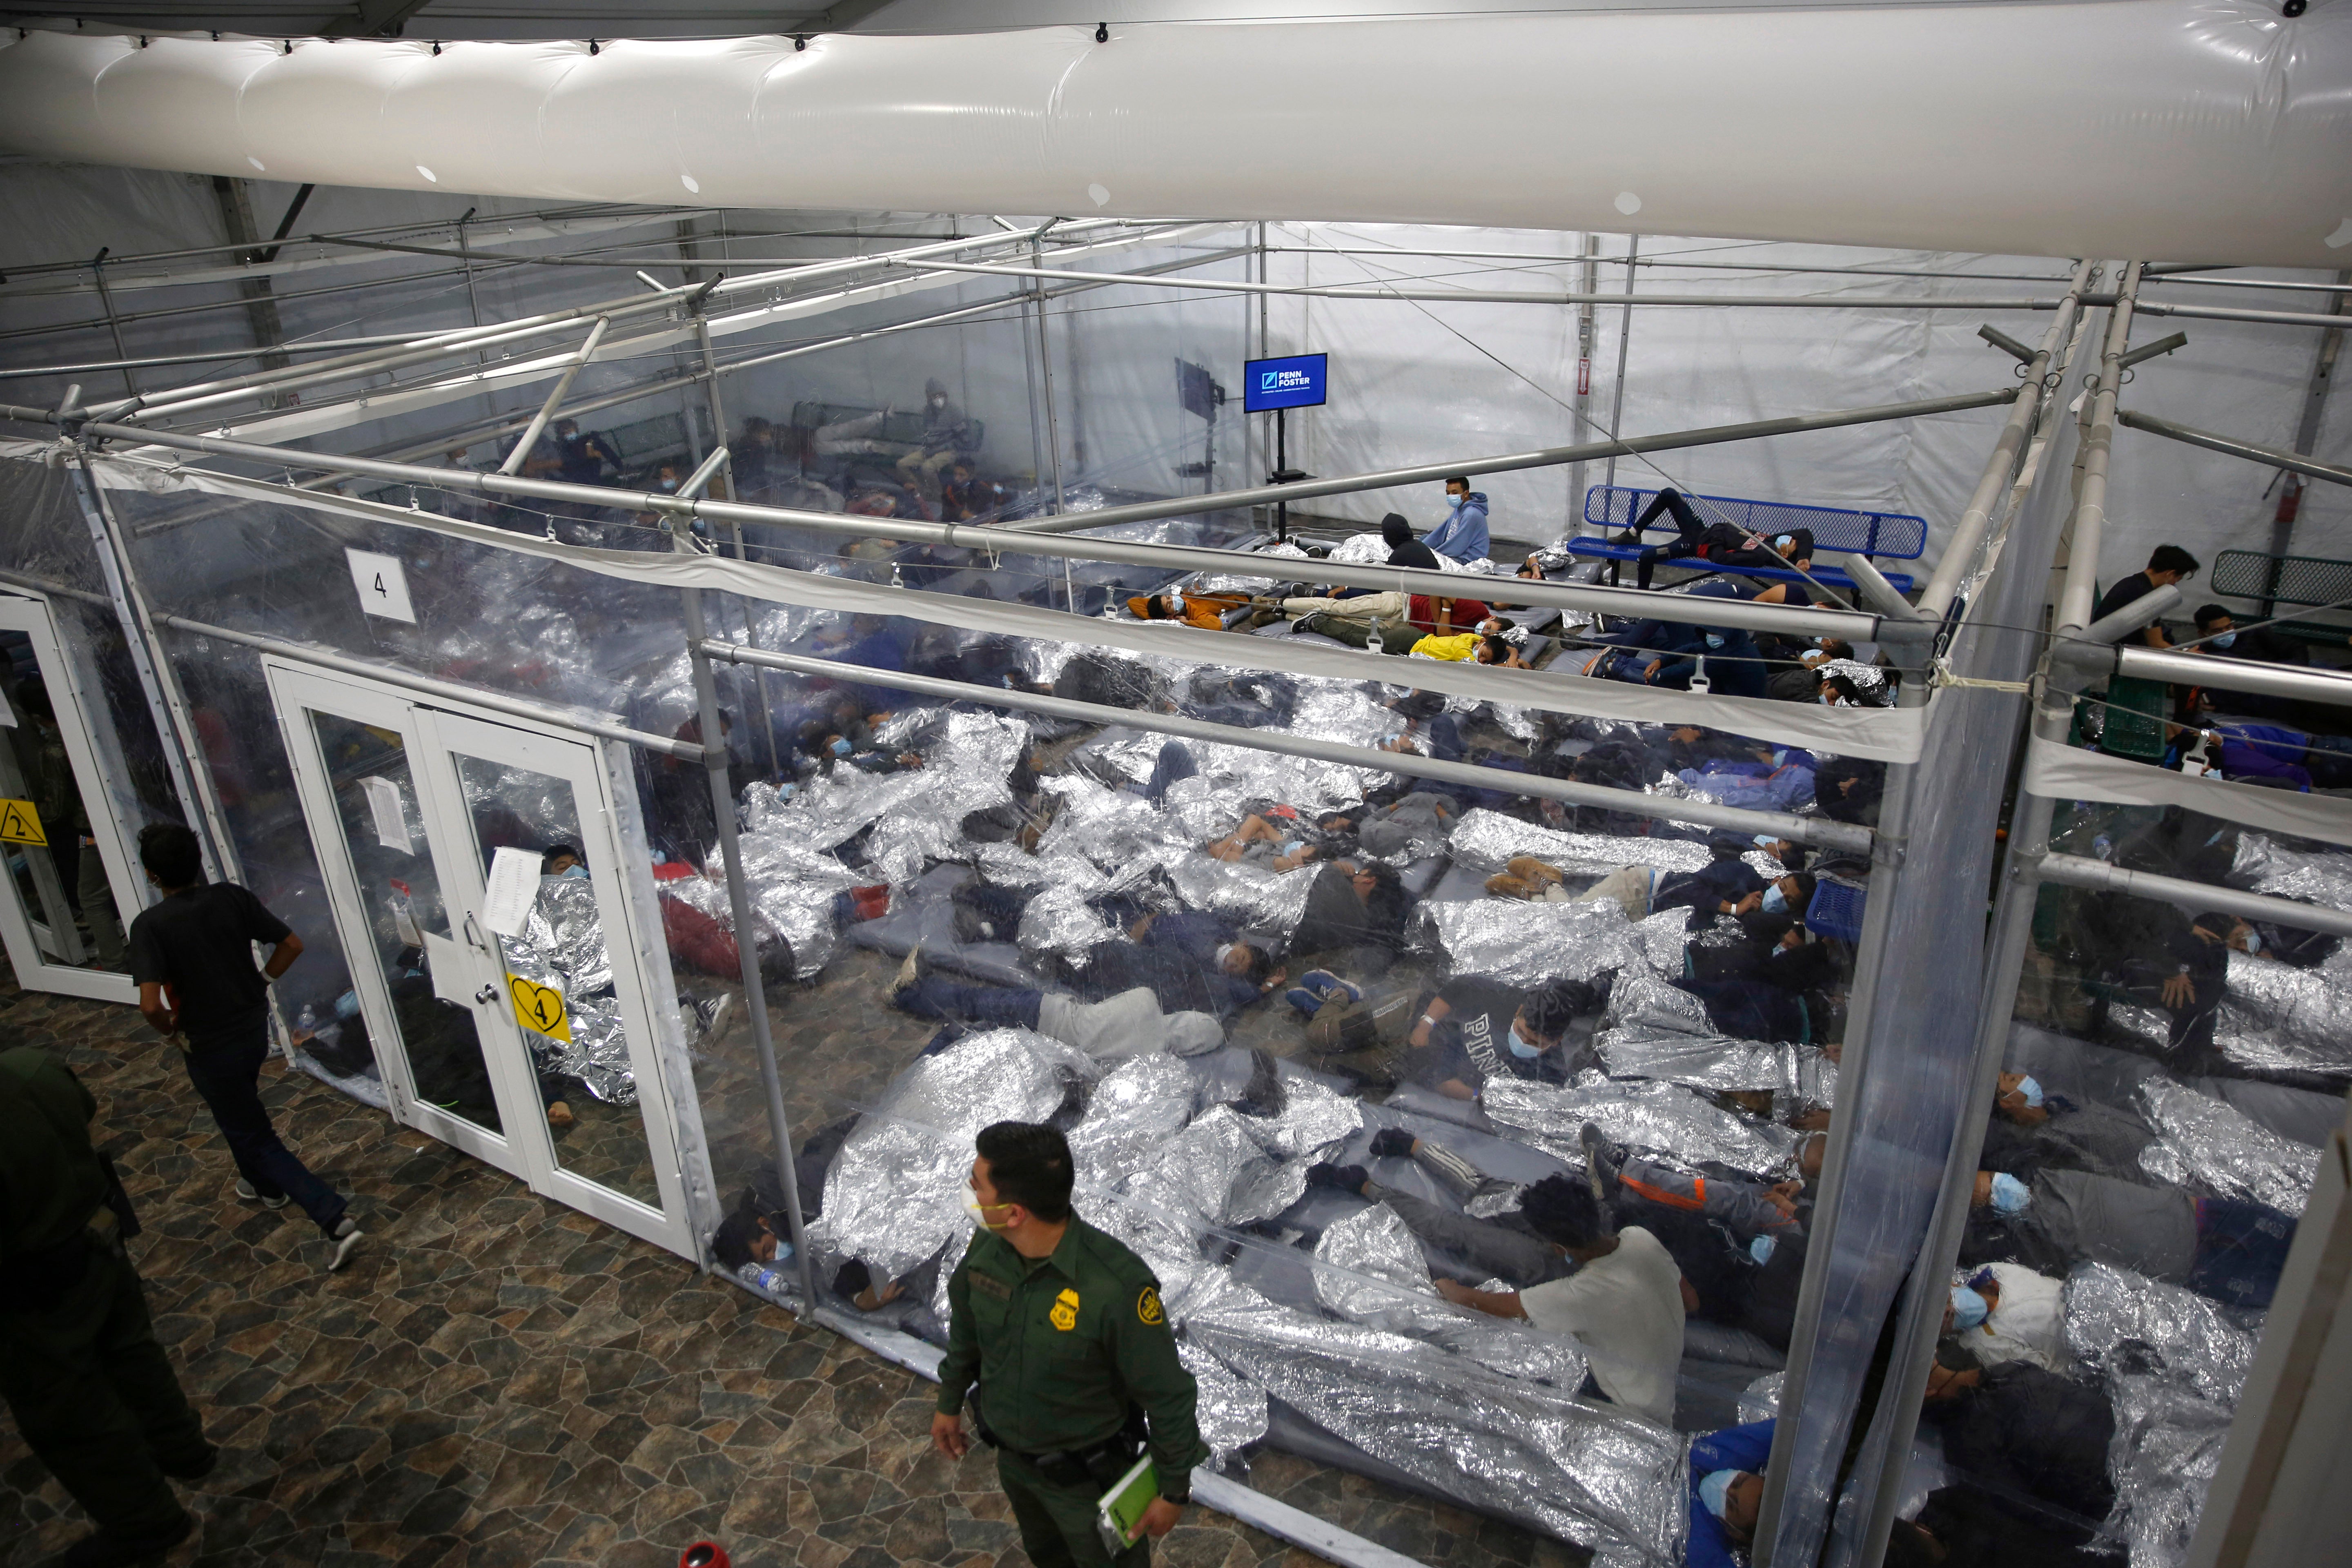 There are more than 1,000 unaccompanied children in Border Patrol custody, the highest level since April, during a spring surge in crossings.